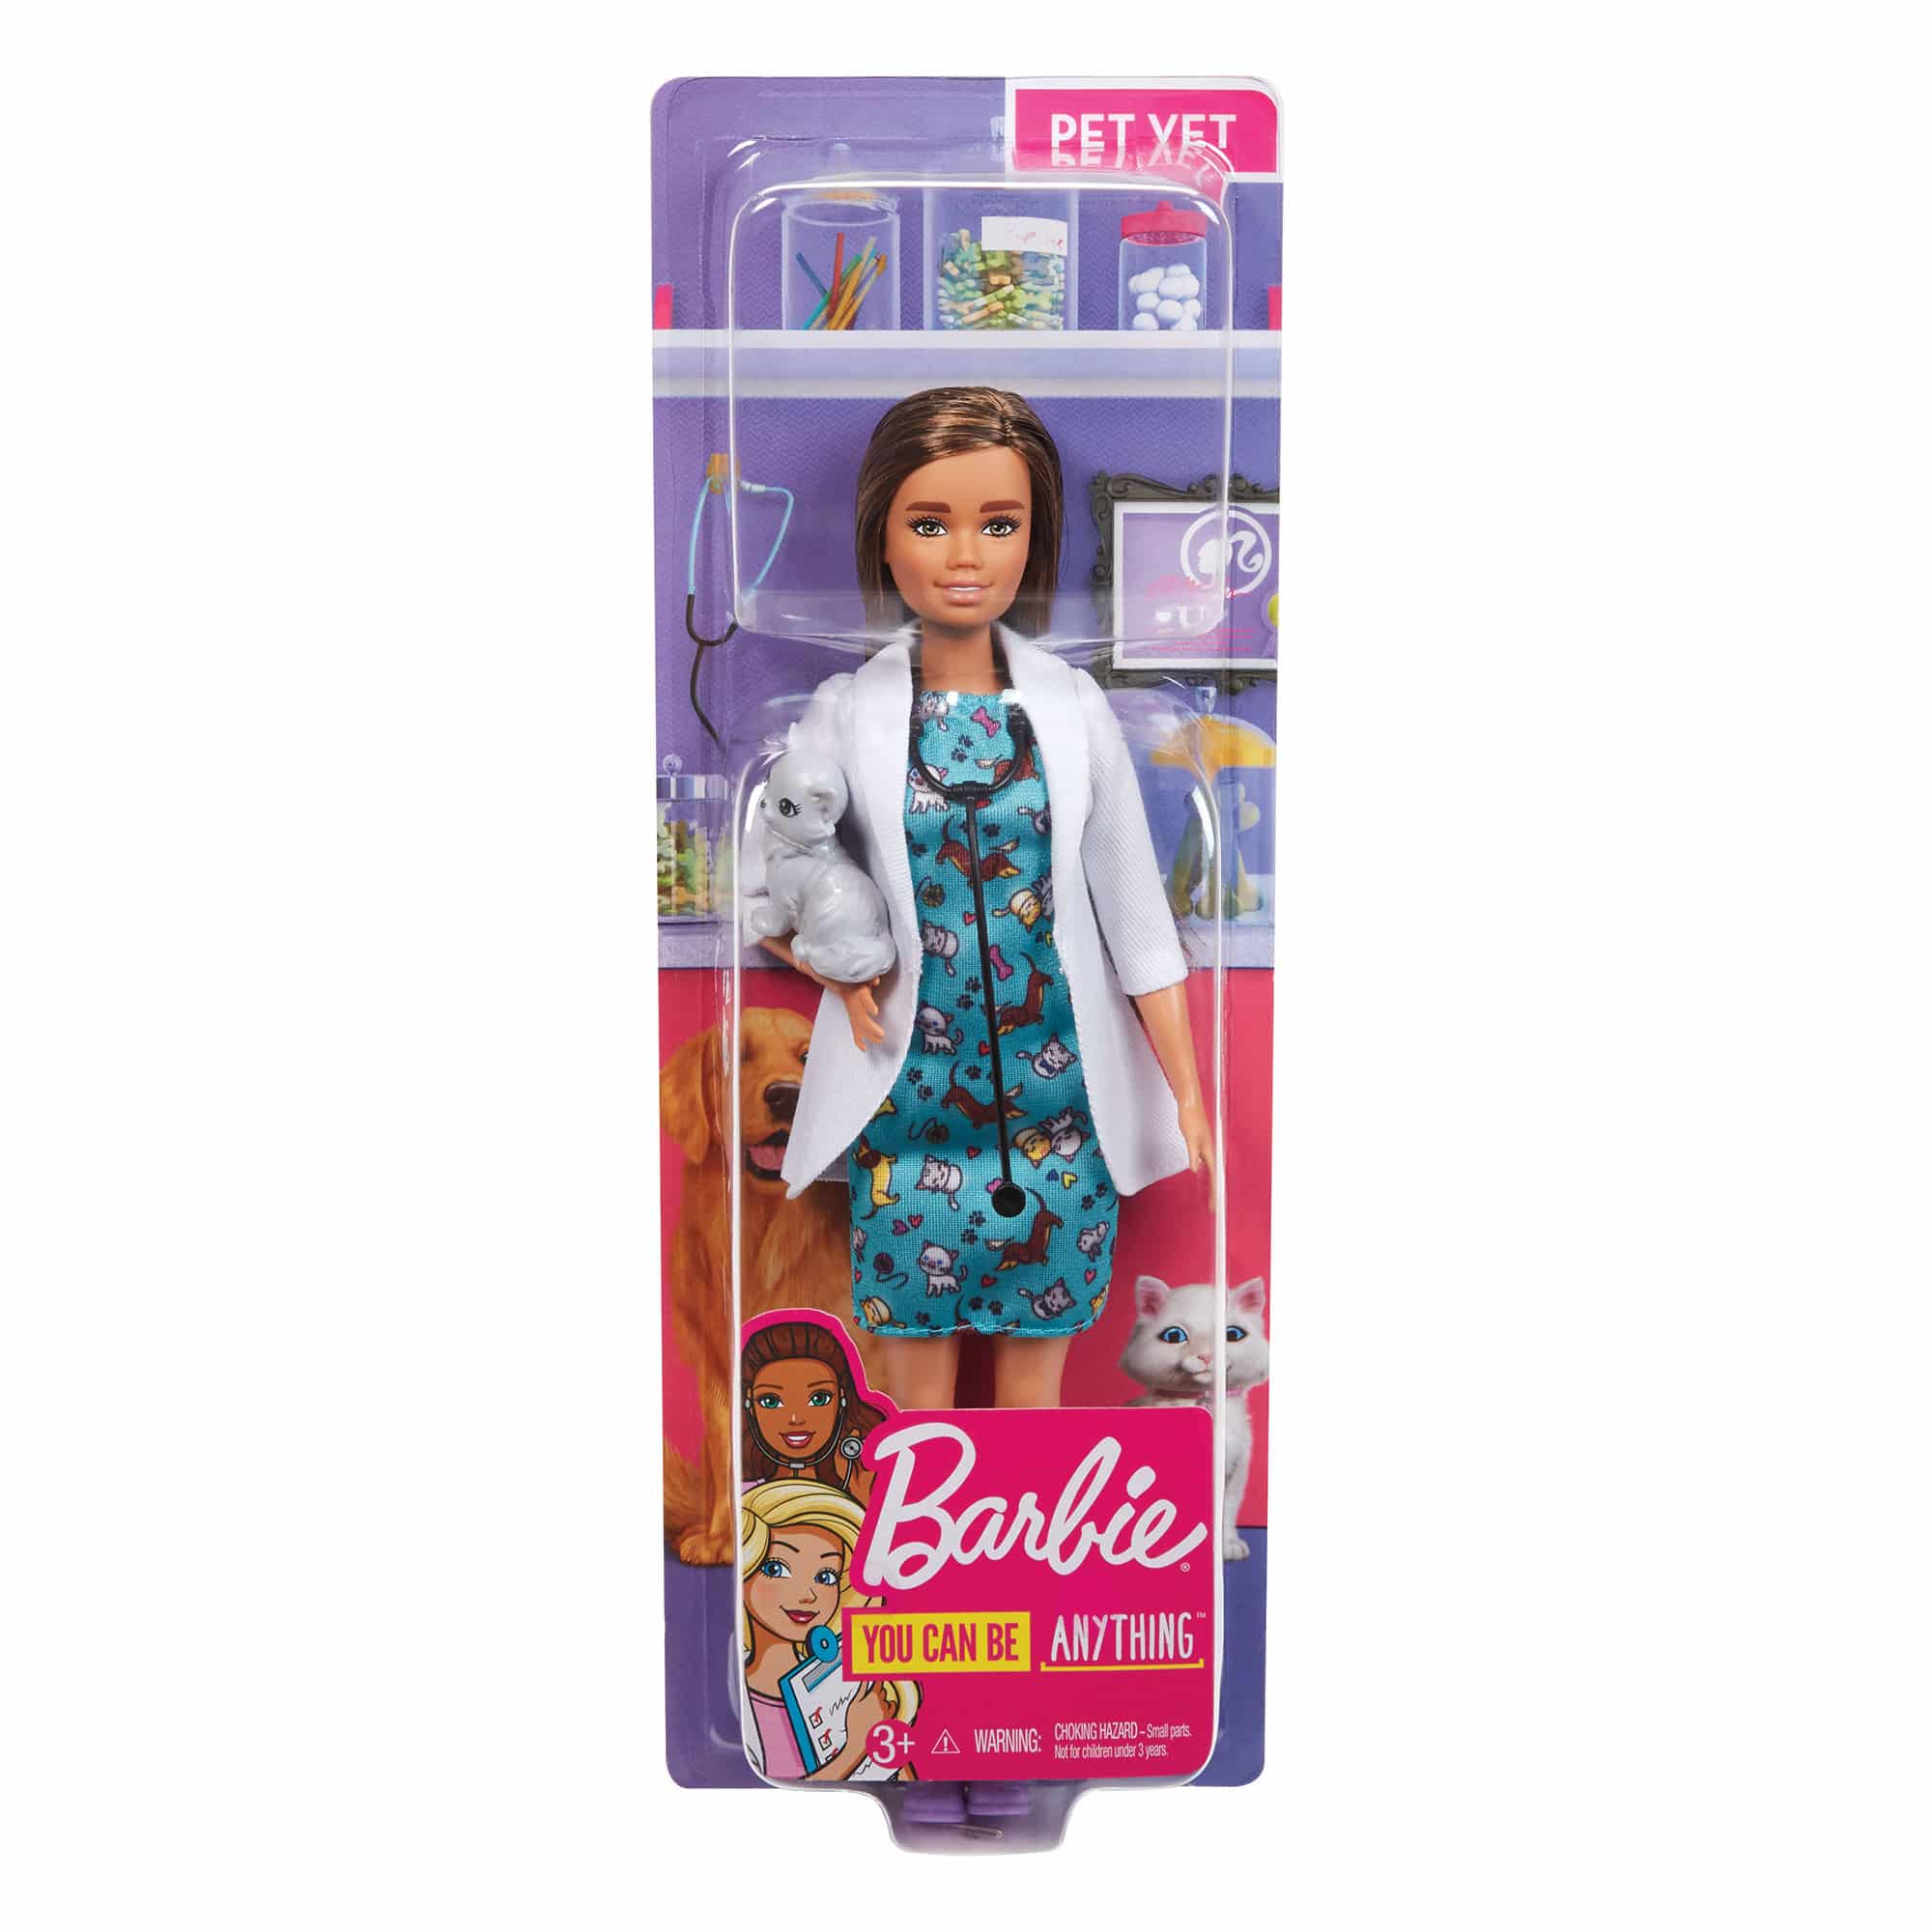 Barbie - You Can Be Anything - Pet Vet